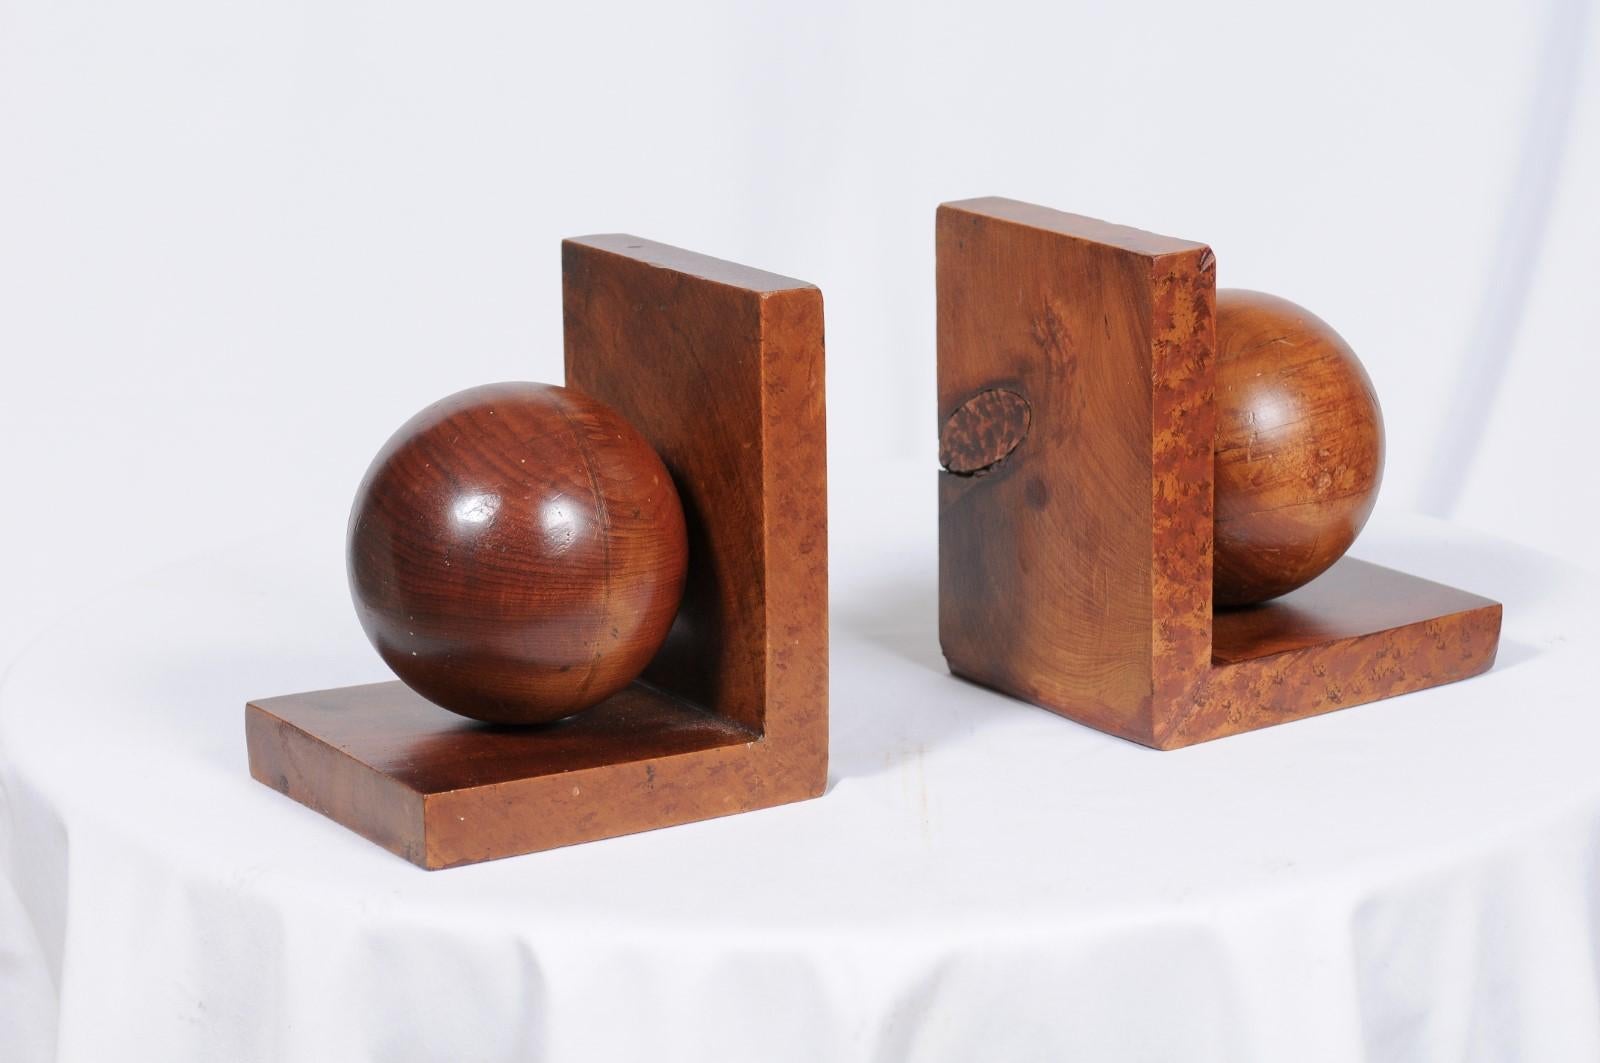 Vintage wood bookends featuring a large ball nestled within the frame of the bookend, and featuring both burled and finely grained woods. Classic, clean, and contemporary!